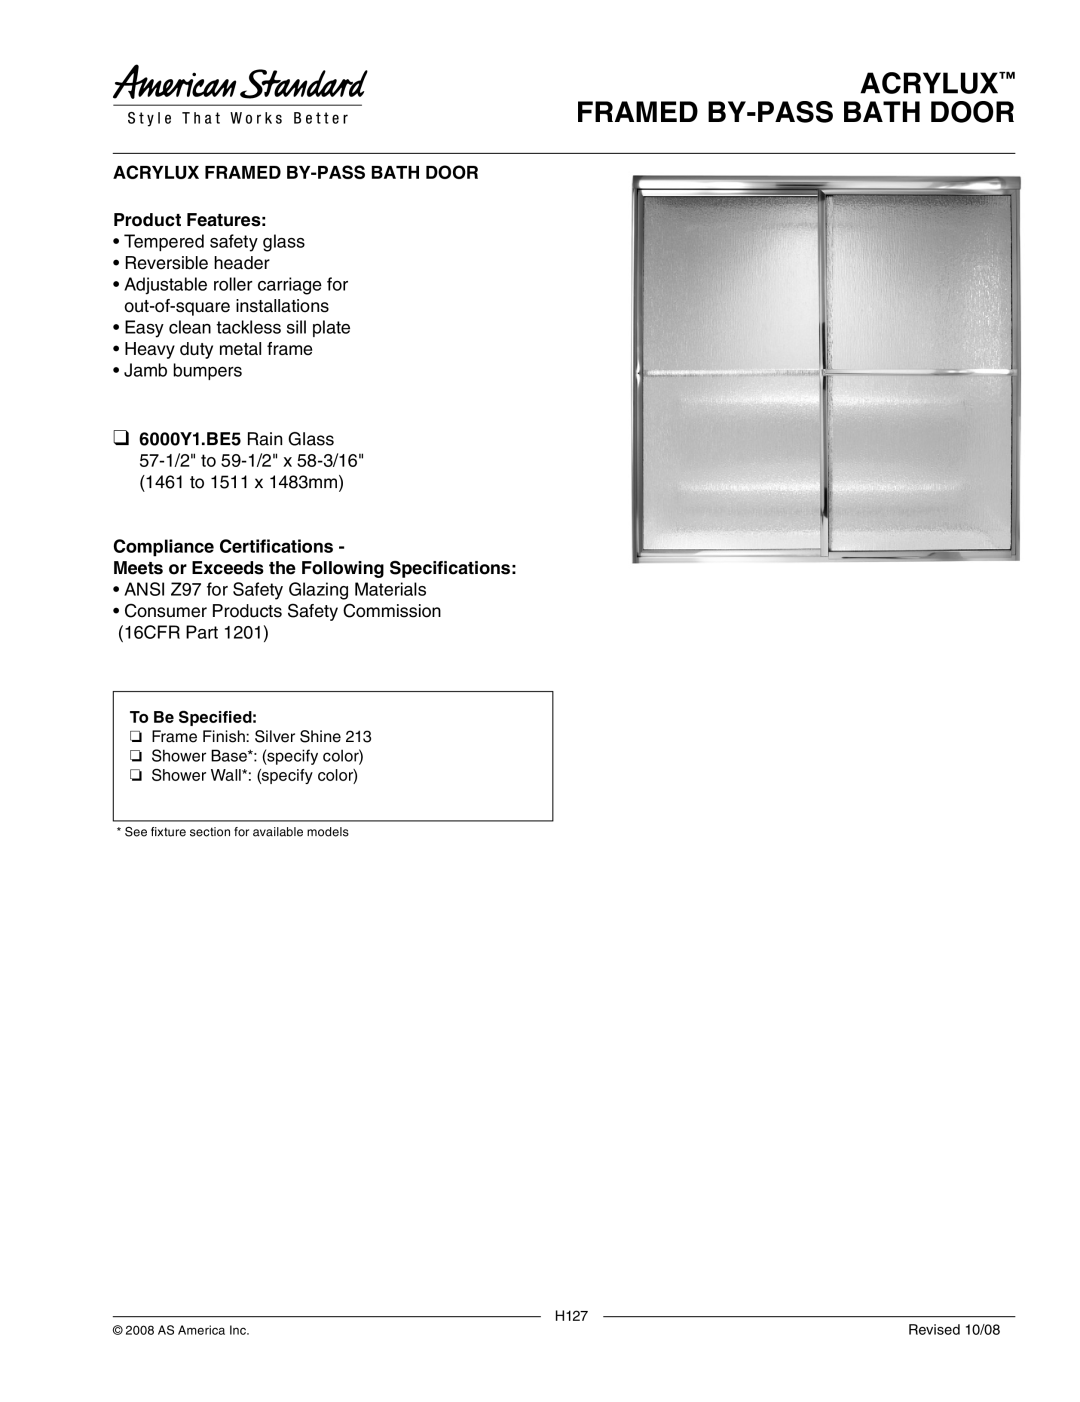 American Standard 6000Y1.BE5 manual Acrylux Framed By-Pass Bath Door, ACRYLUX FRAMED BY-PASS BATH DOOR Product Features 